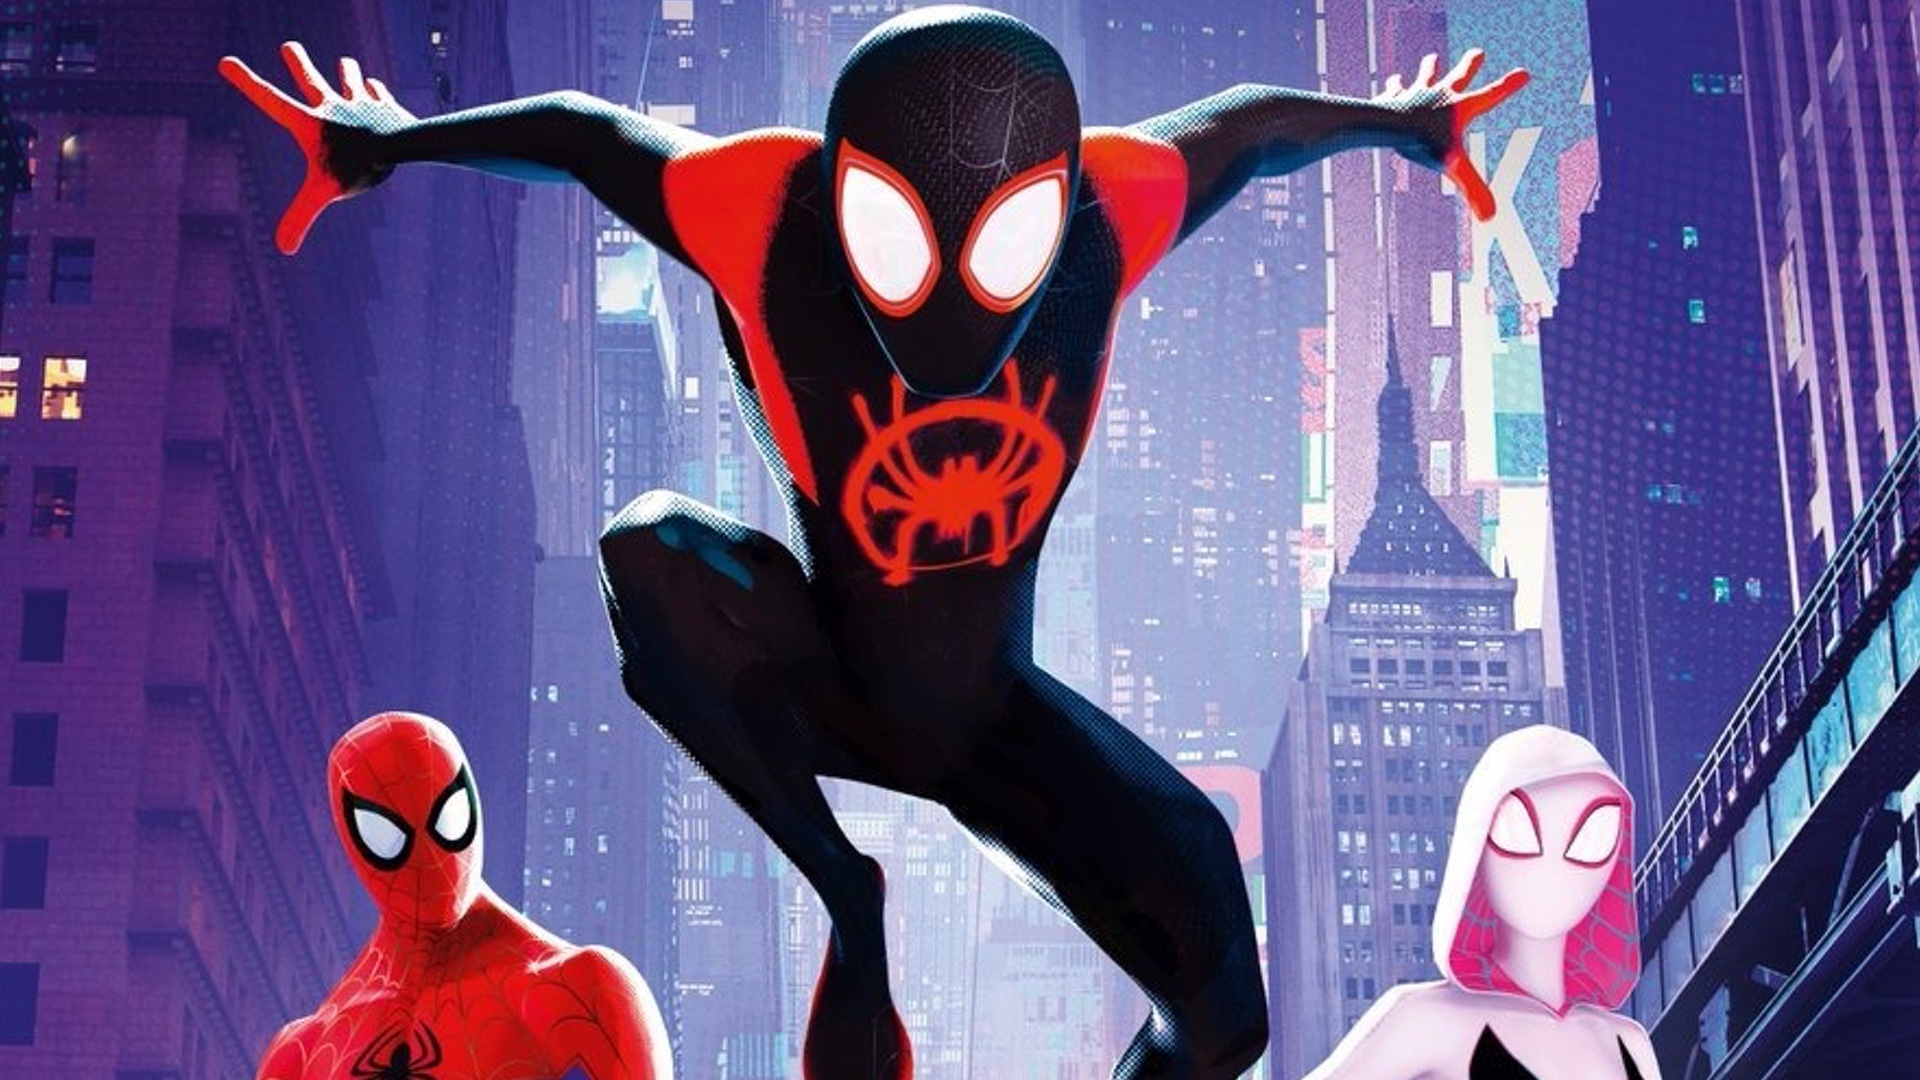 Image result for into the spider verse